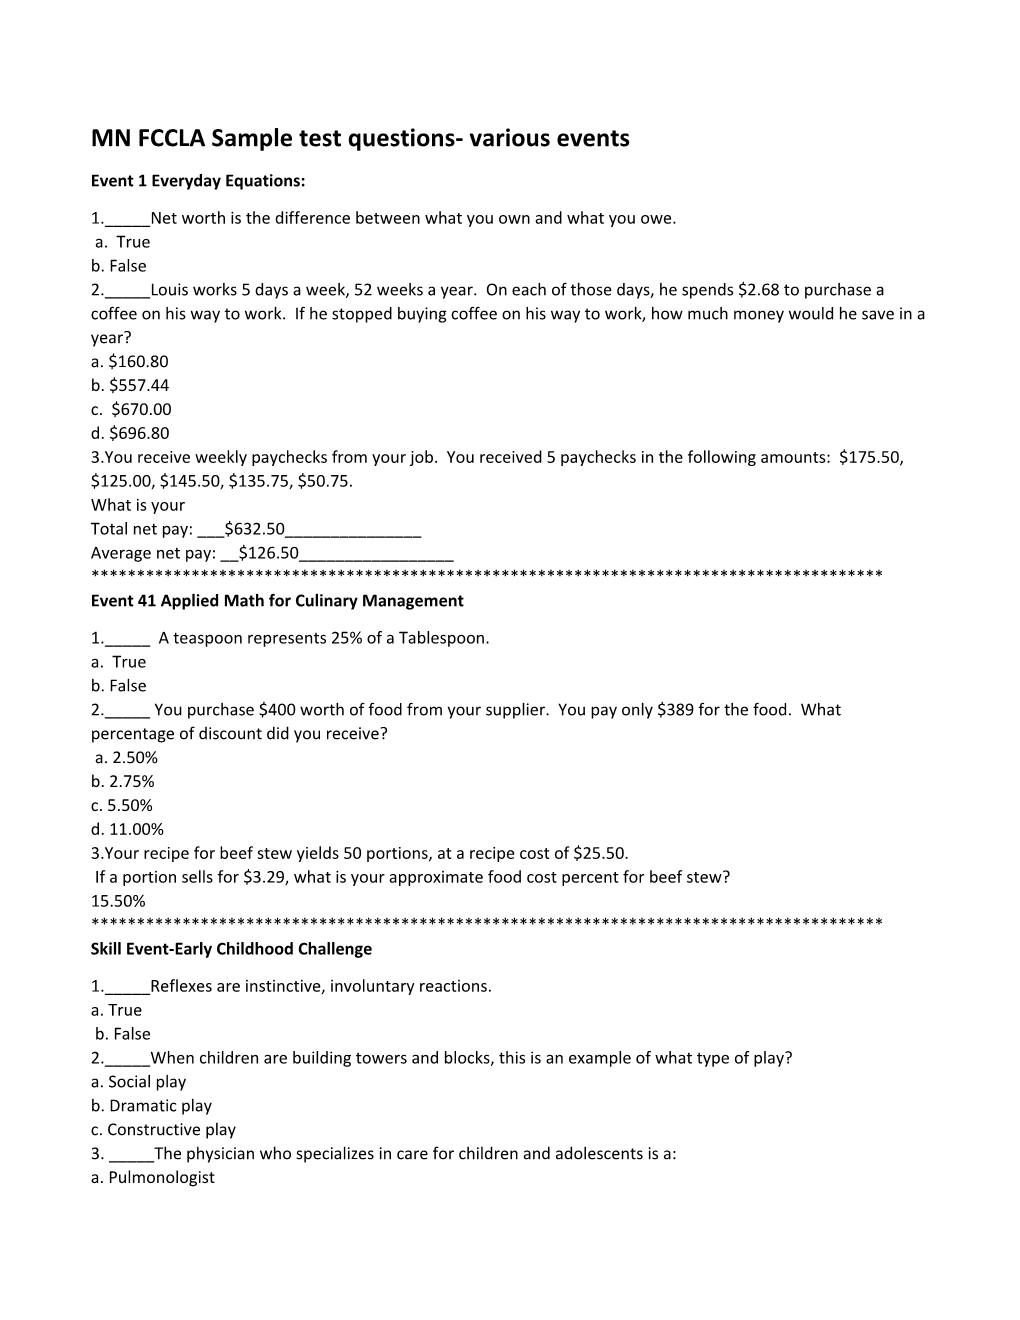 MN FCCLA Sample Test Questions- Various Events